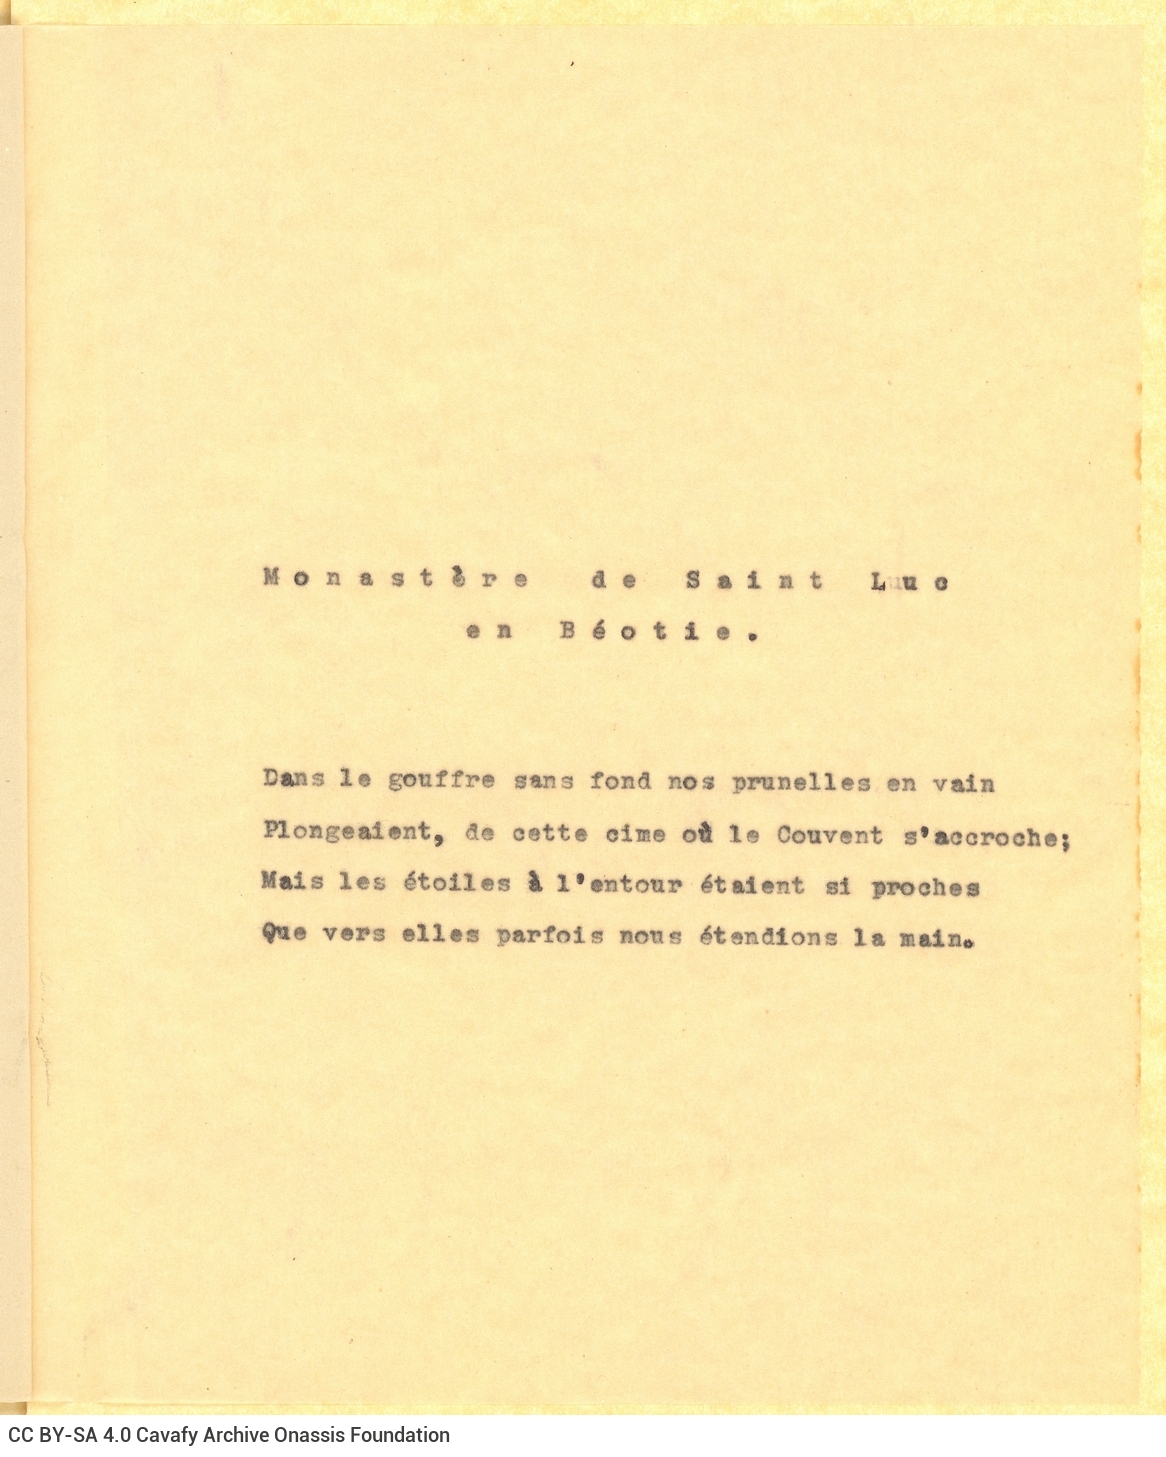 Typewritten poem collection and introductory text in French in a homemade booklet with several sheets. Handwritten emendat